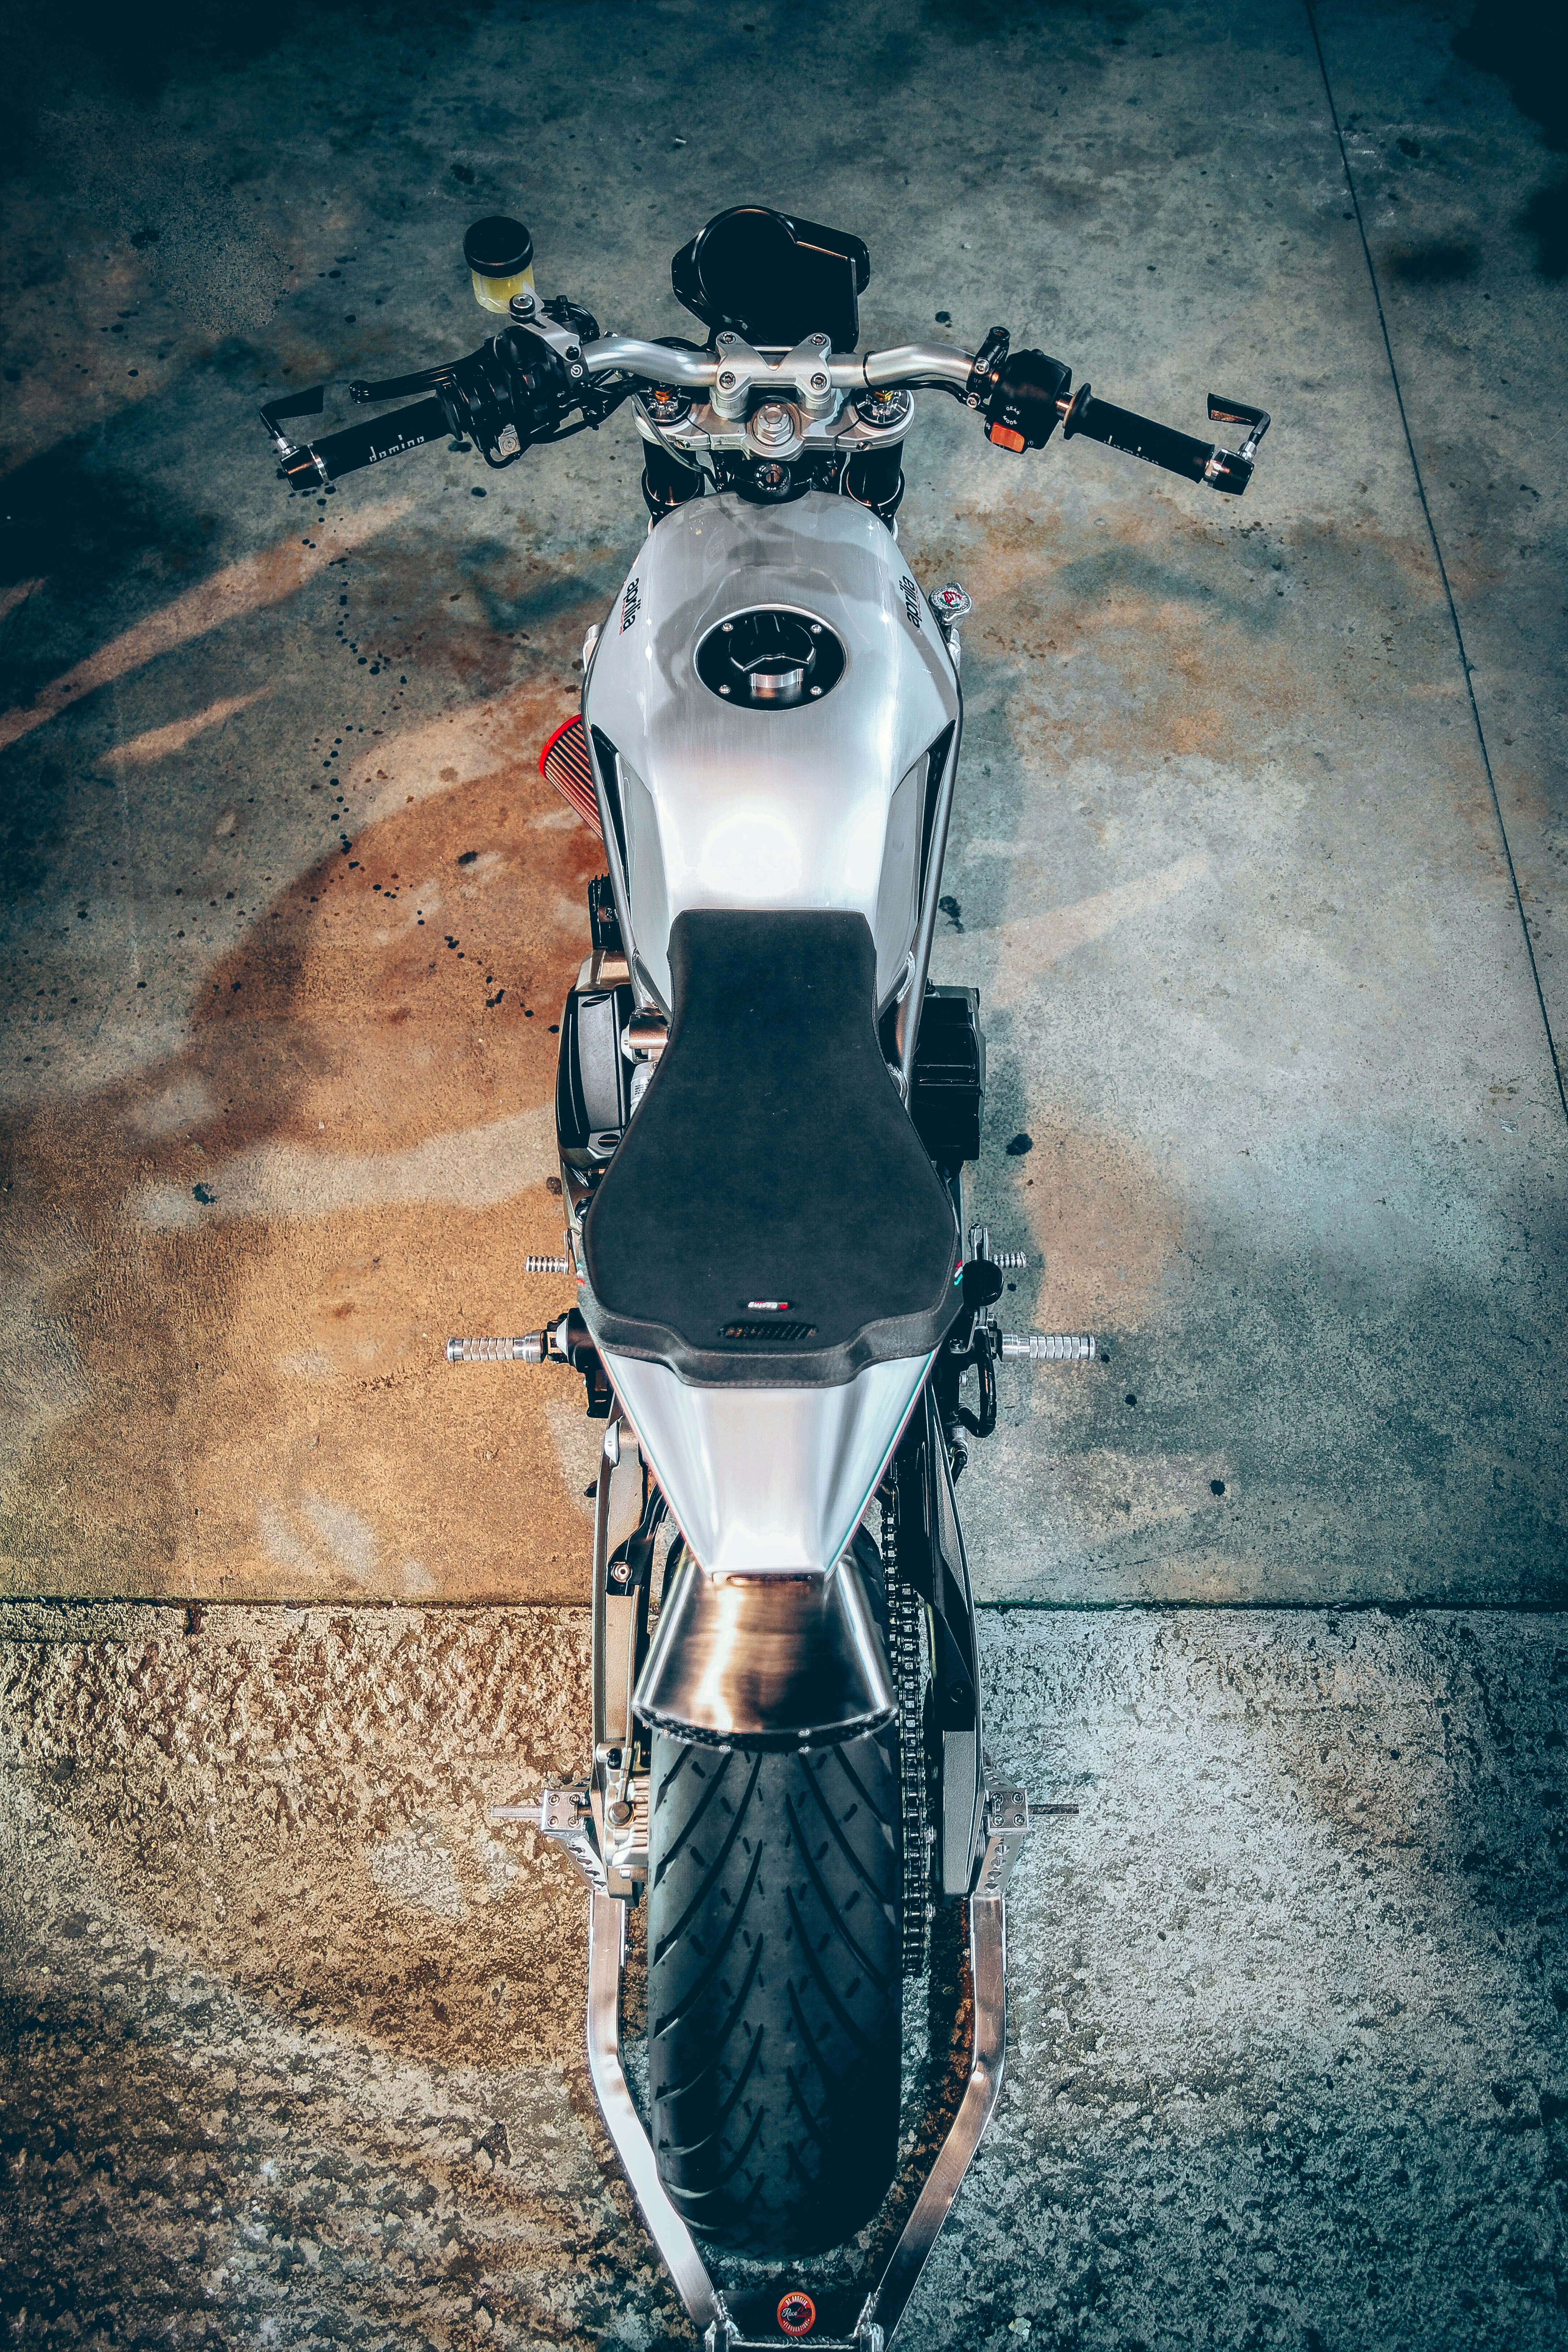 motorcycles, view from above, motorcycle, bike, aprilia